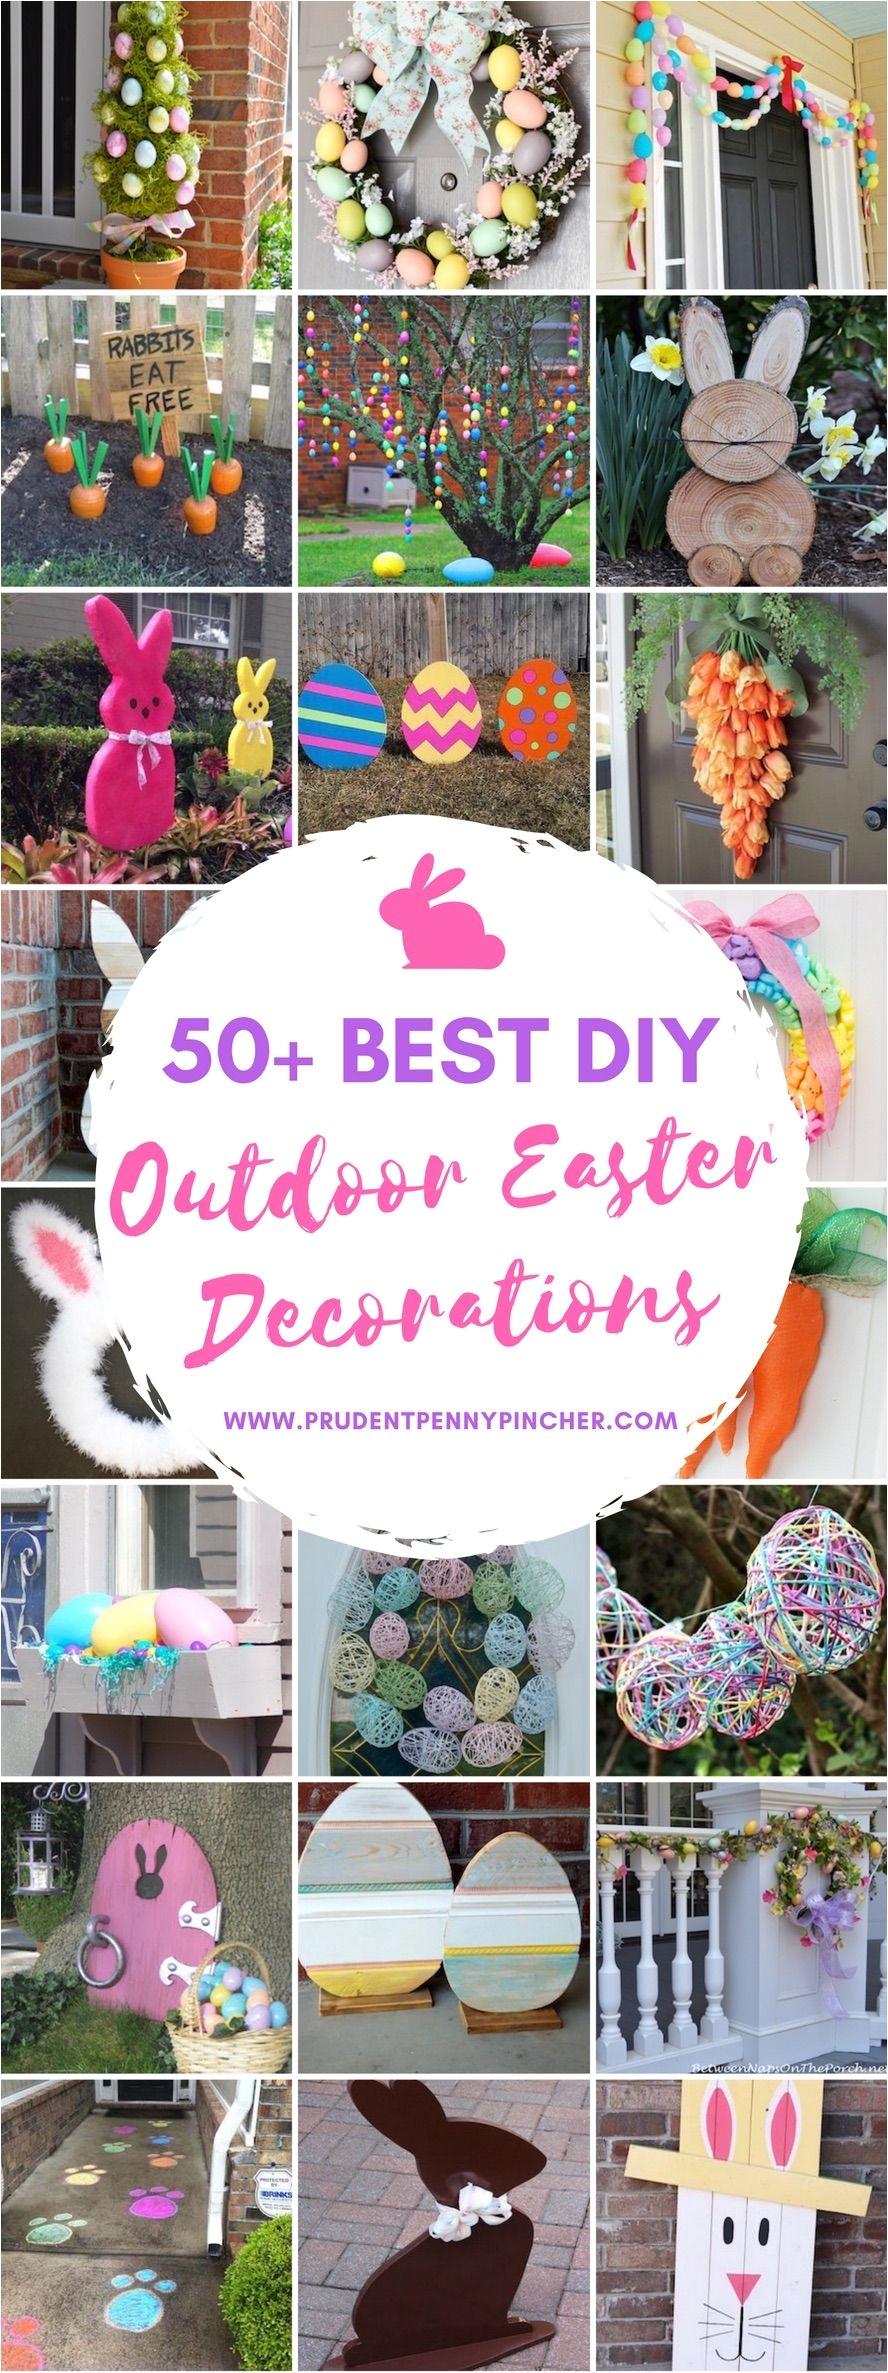 what an awesome idea to decorate the yard for easter 973thedawg com easter pinterest easter holidays and holiday fun